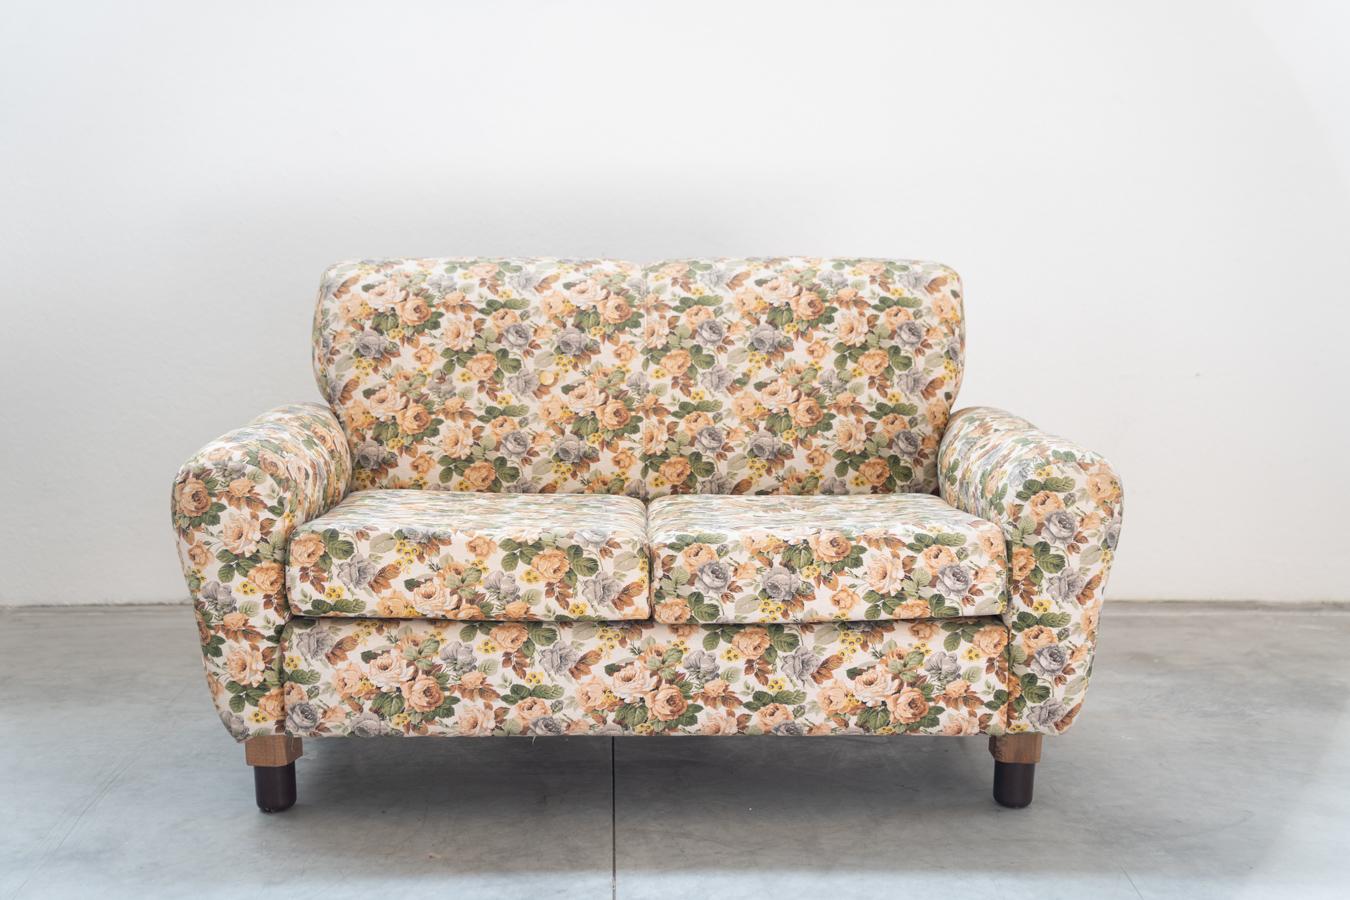 2-seater sofa, floral fabric, wood frame, plastic and wood feet, 1970s
DESCRIPTION                          
PIECES                                      1
DESIGN PERIOD            1970-1979
PRODUCTION YEAR           1970
COUNTRY OF PRODUCTION       